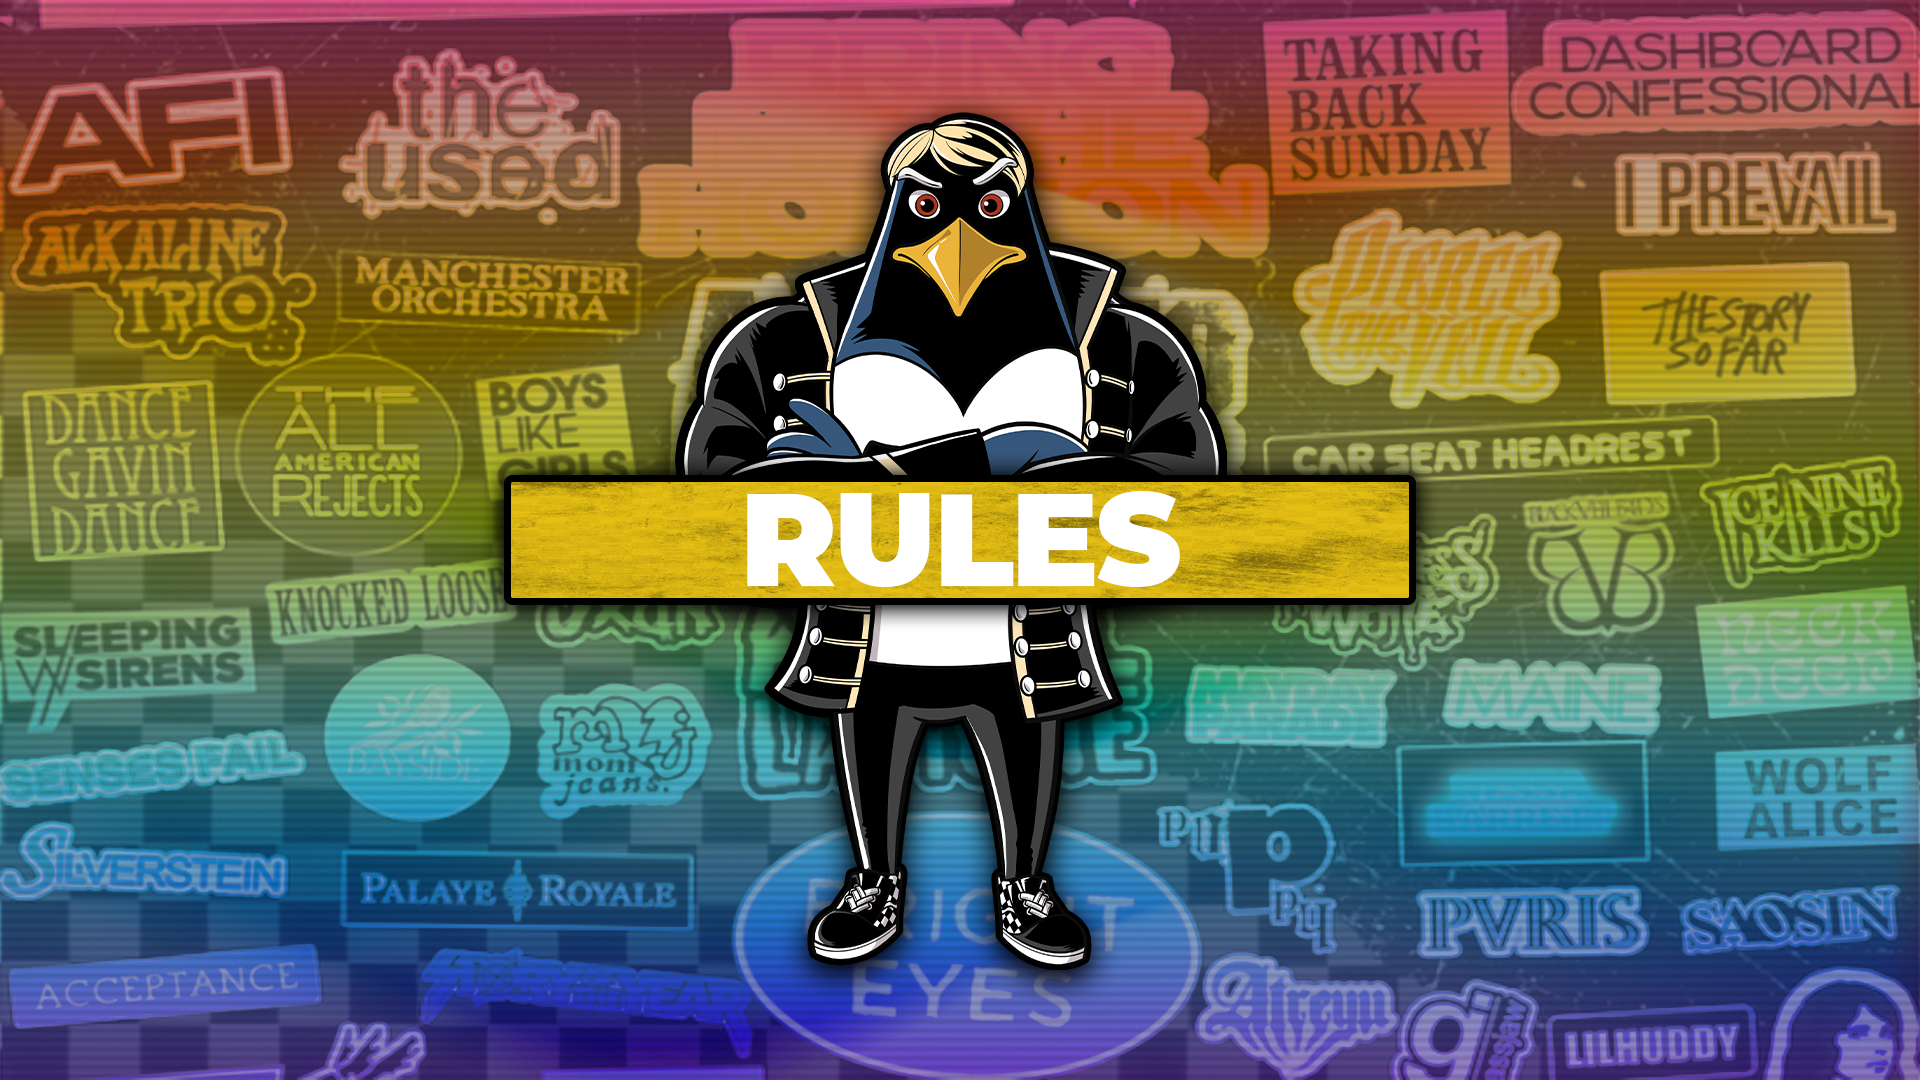 Prominent Emo Night 'RULES' image, featuring a stern-looking cartoon penguin dressed in edgy punk attire, anchoring the center of a multicolored neon-lit background with names of famed emo and punk bands like AFI, The Used, and Dashboard Confessional. The word 'RULES' stretches across a yellow banner, suggesting guidelines or policies for the event, set against a backdrop that captures the essence of the emo music scene.